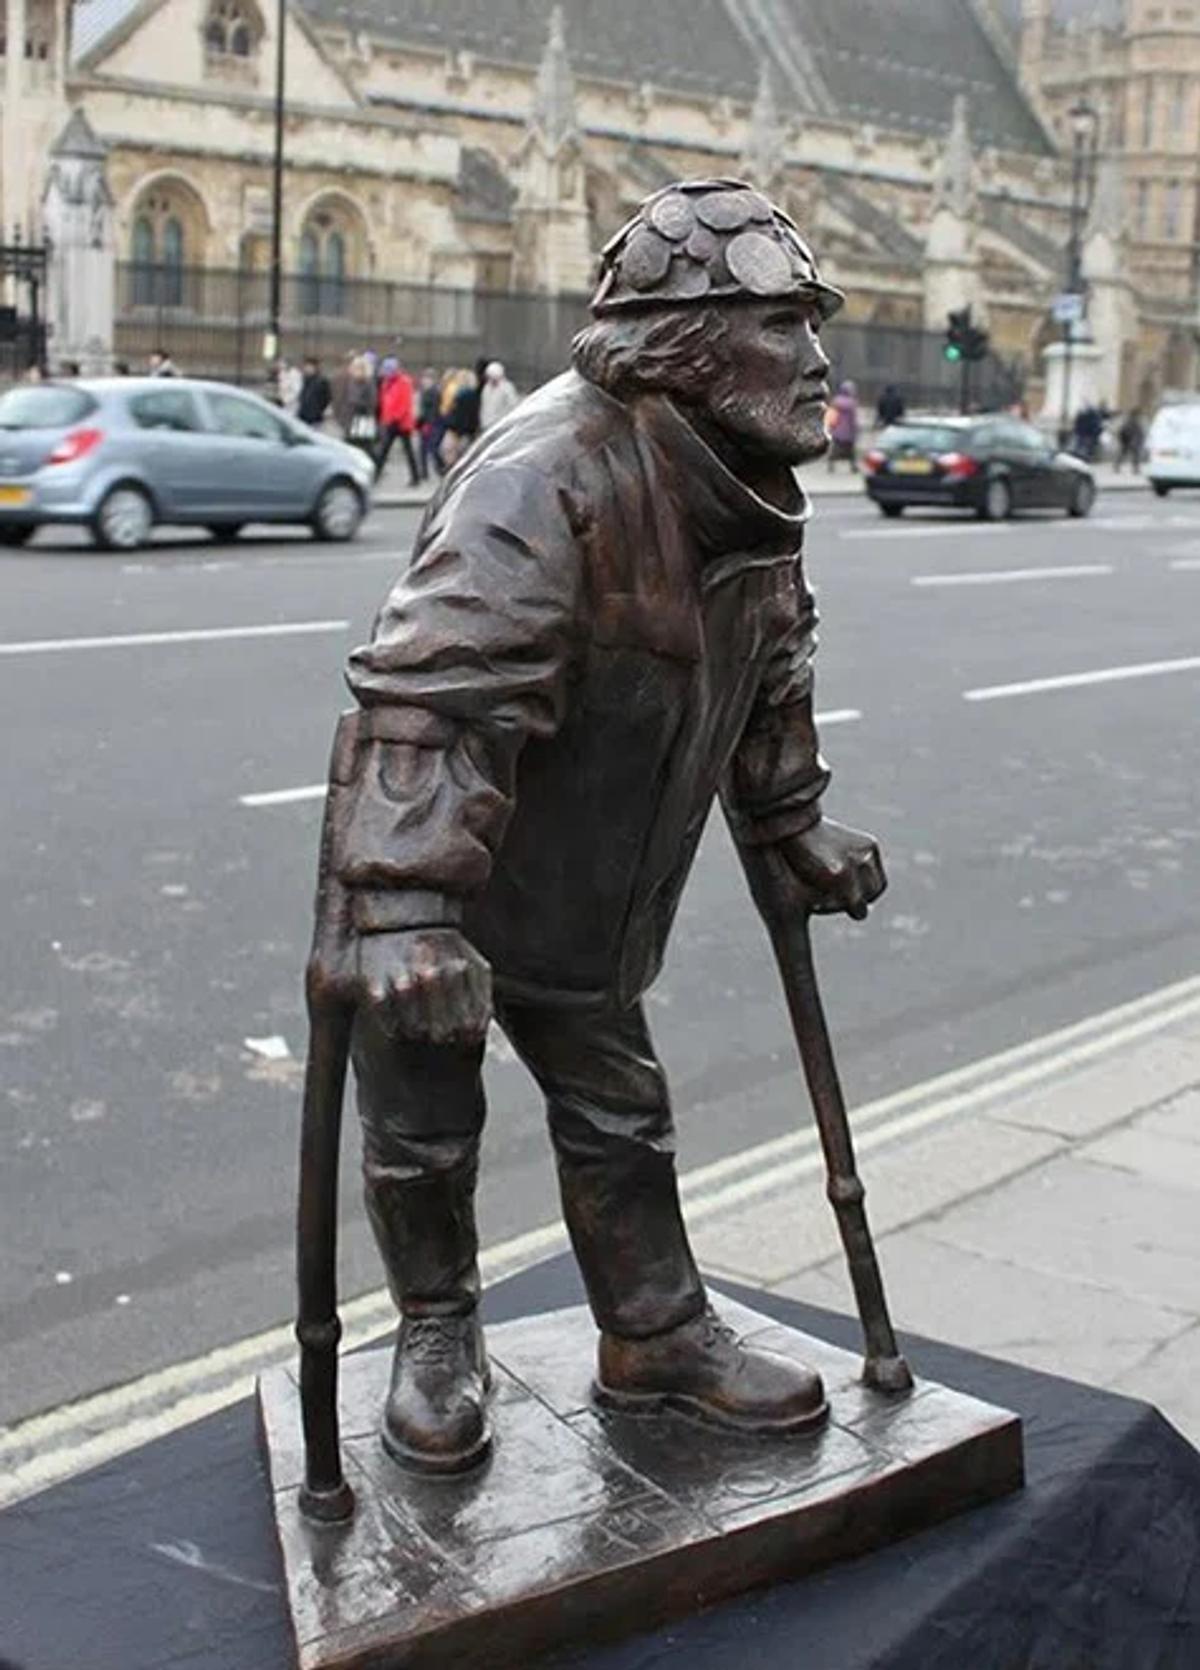 Funds are currently being raised to install the bronze sculpture at 52 Lambeth Road

Photo: Amanda Ward